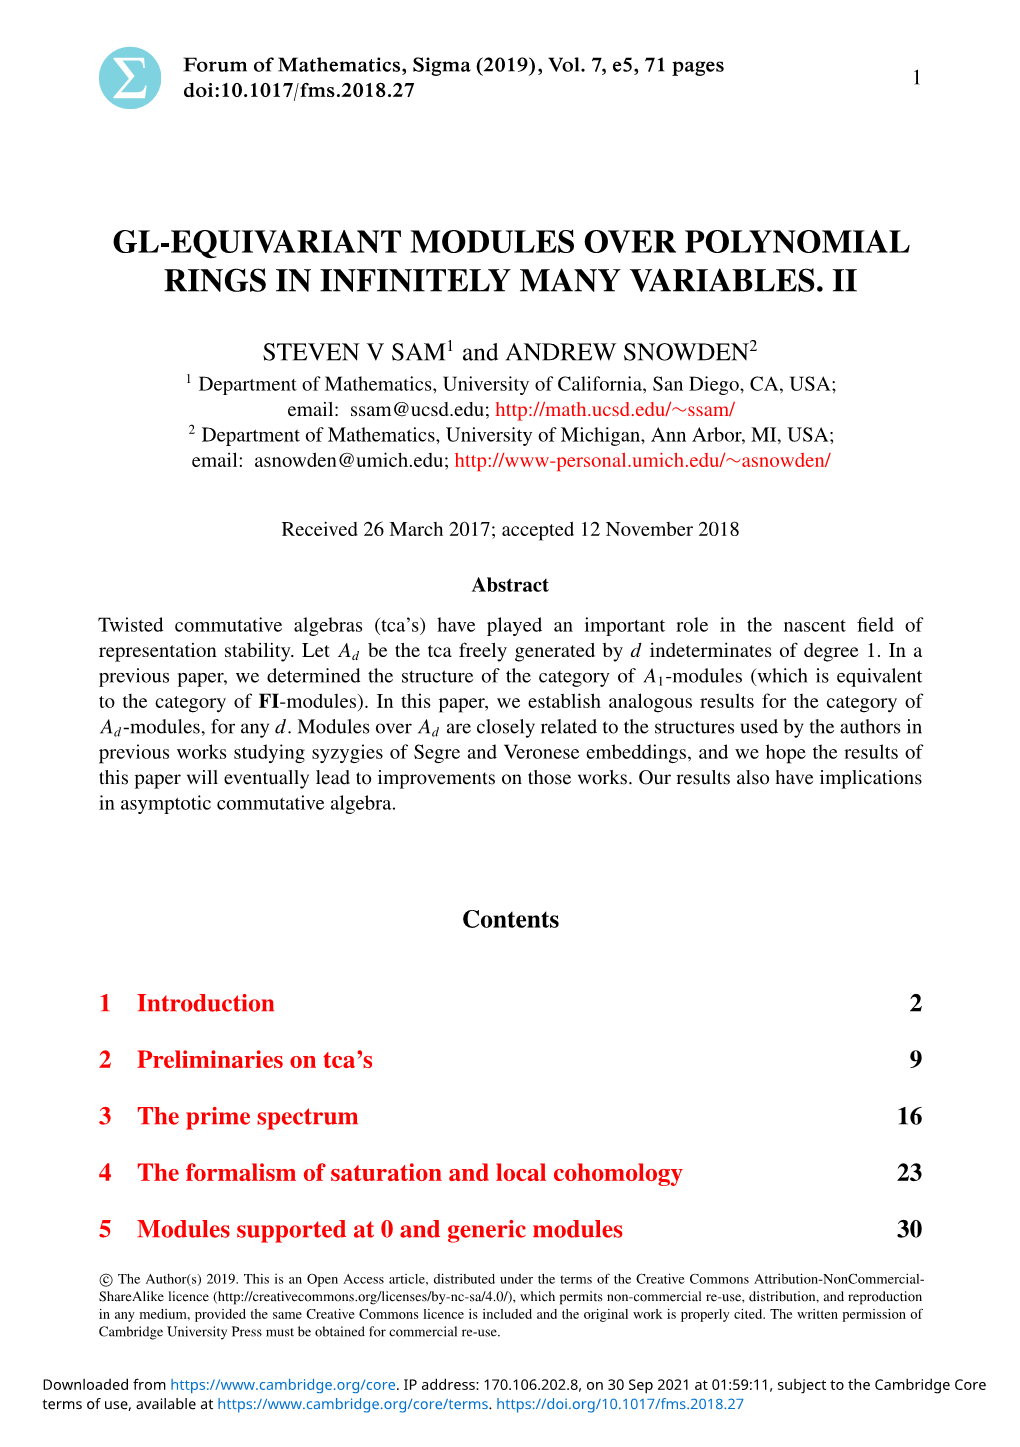 Gl-Equivariant Modules Over Polynomial Rings in Infinitely Many Variables